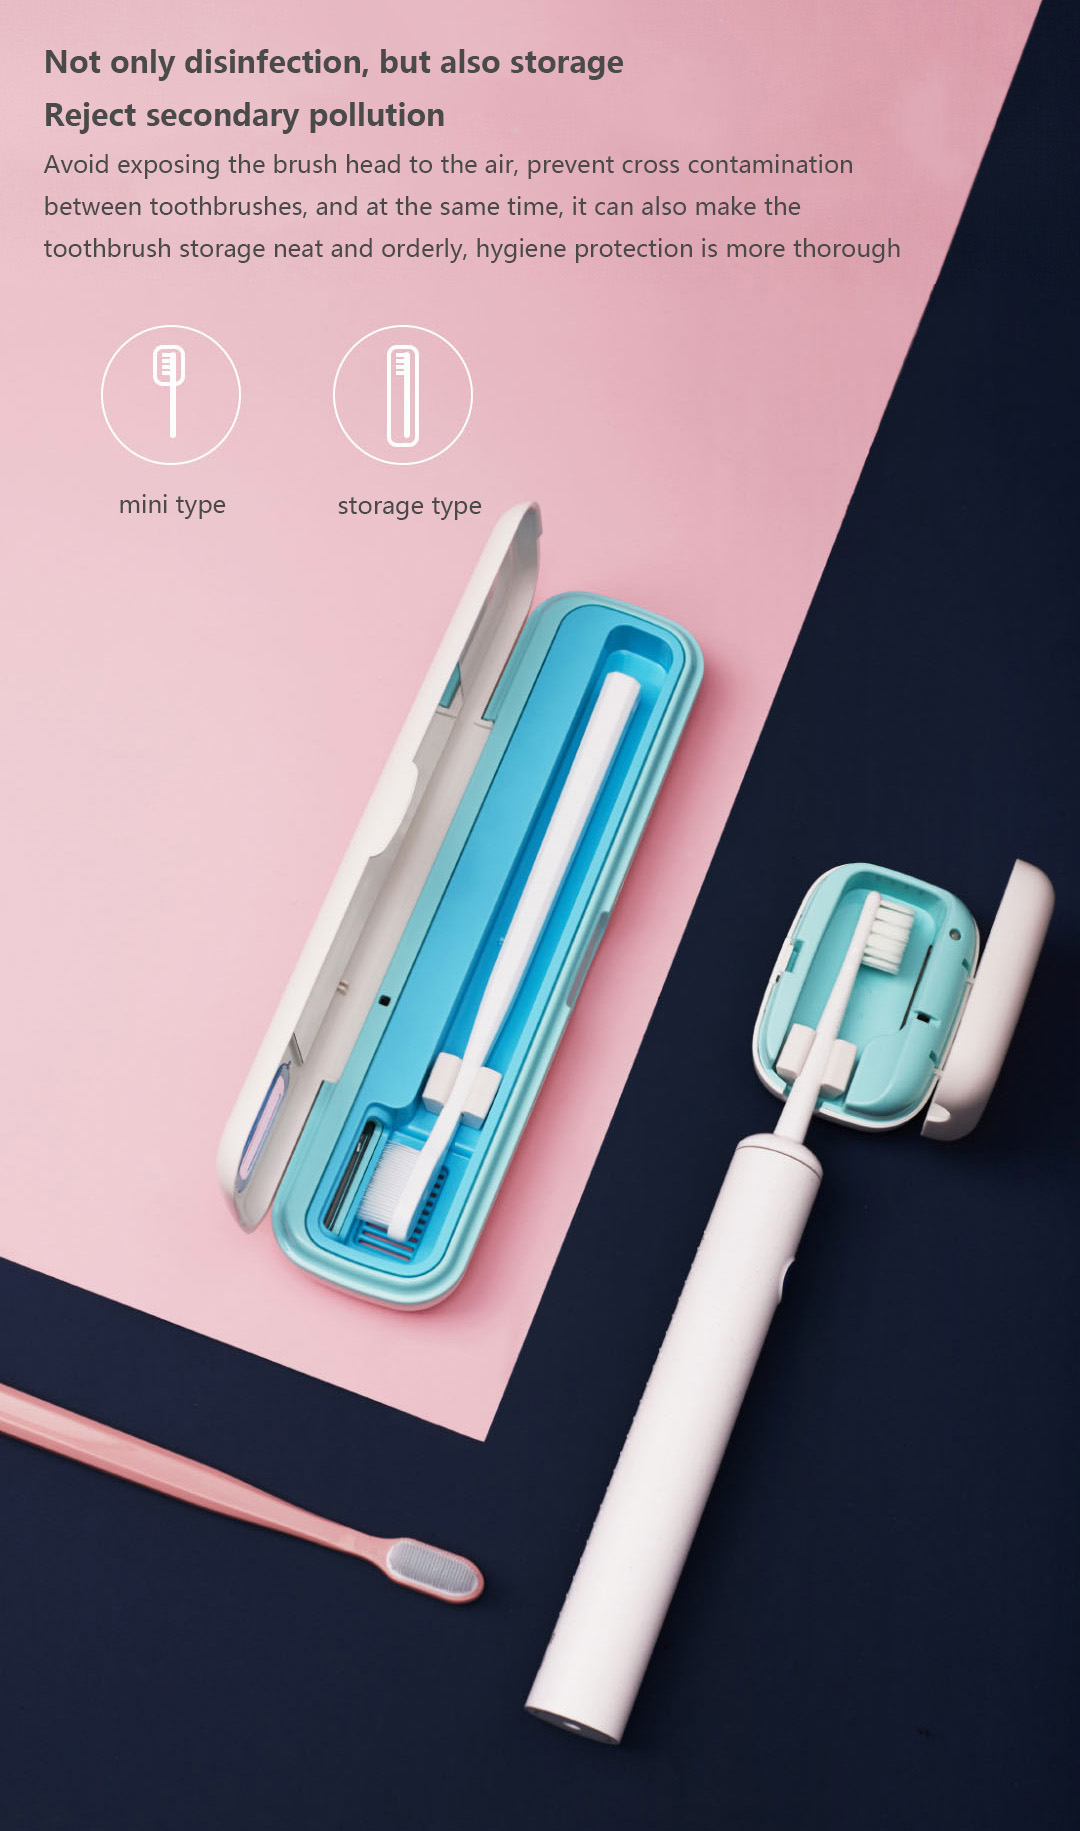 Smartda-UVC-Toothbrush-Sterilizer-Portable-Toothbrush-Timing-Disinfection-Storage-Box-from-1691841-6